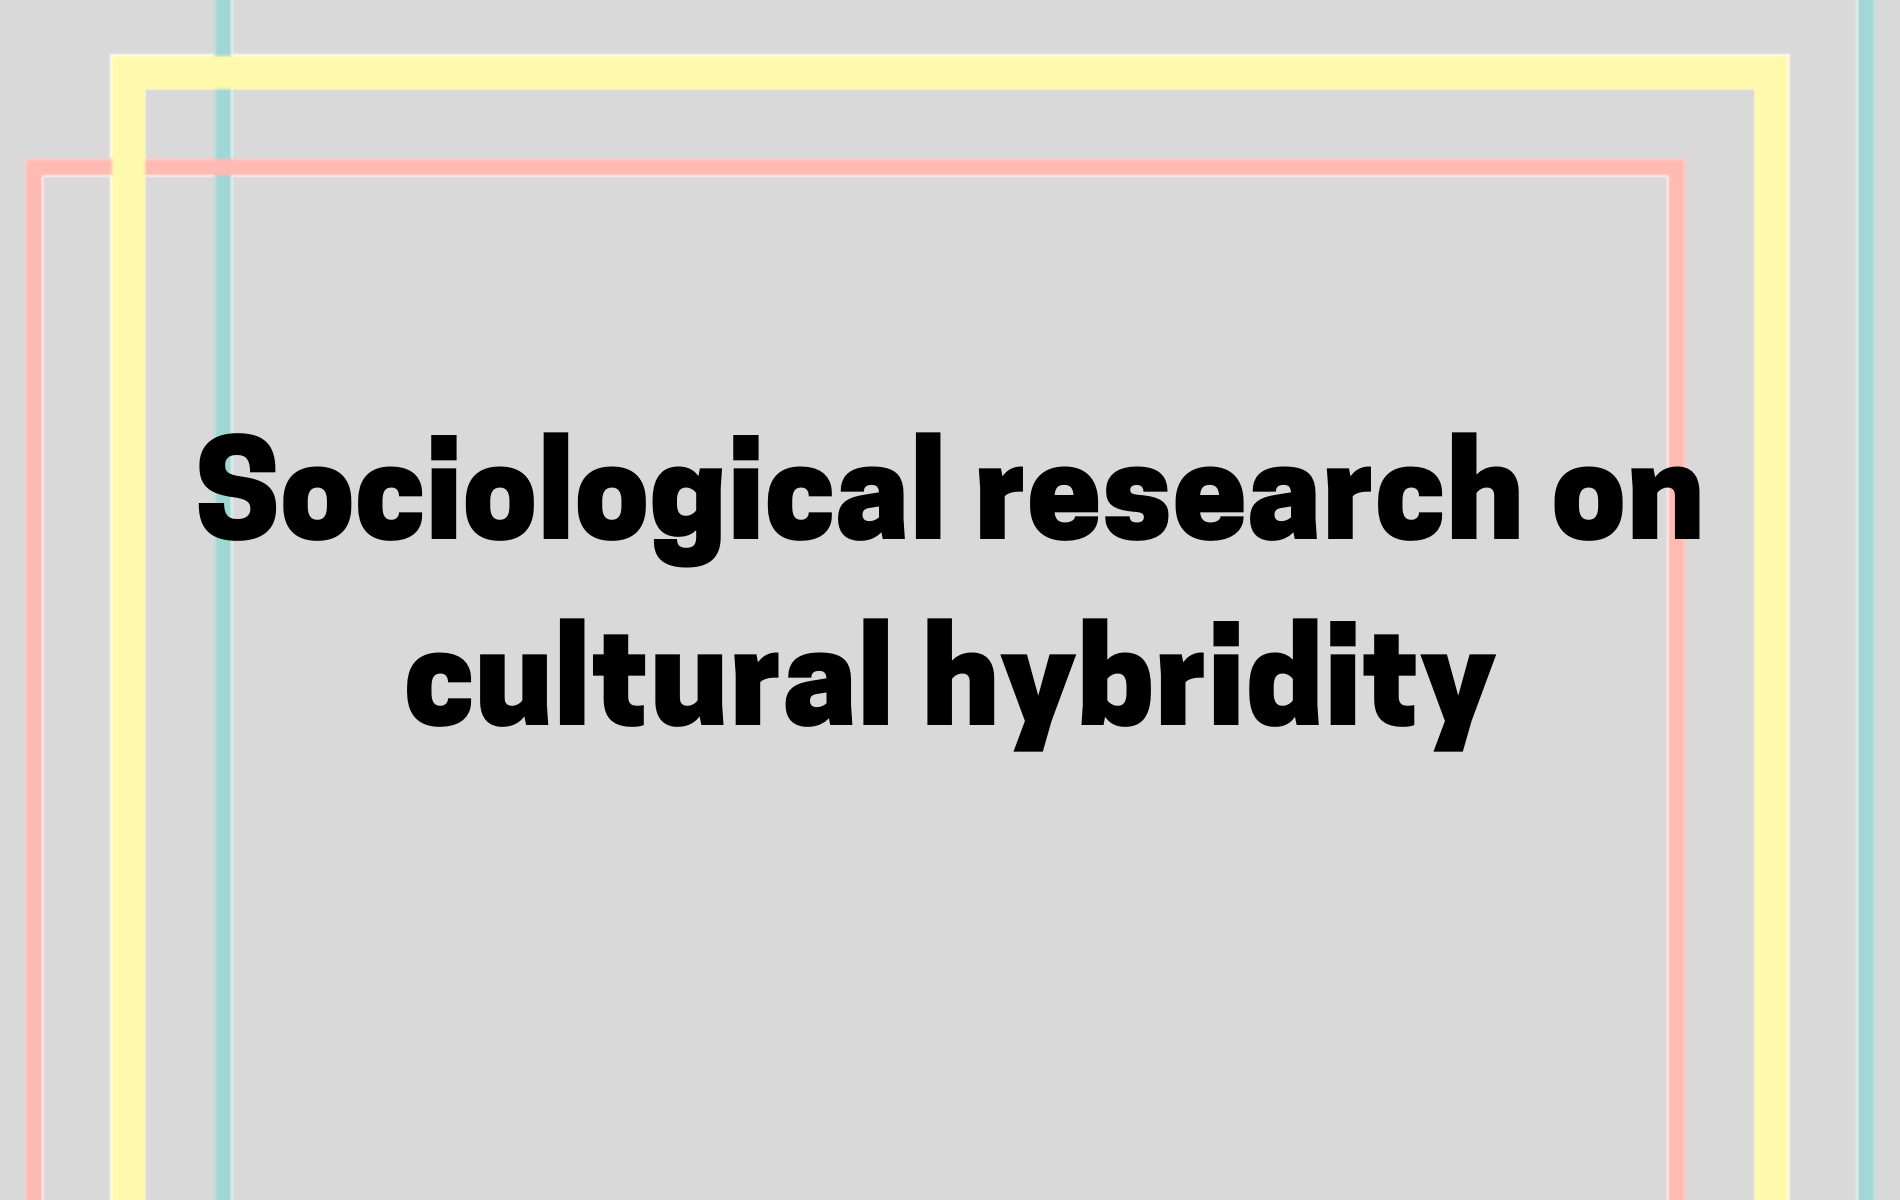 Fluidity of cultural hybridity